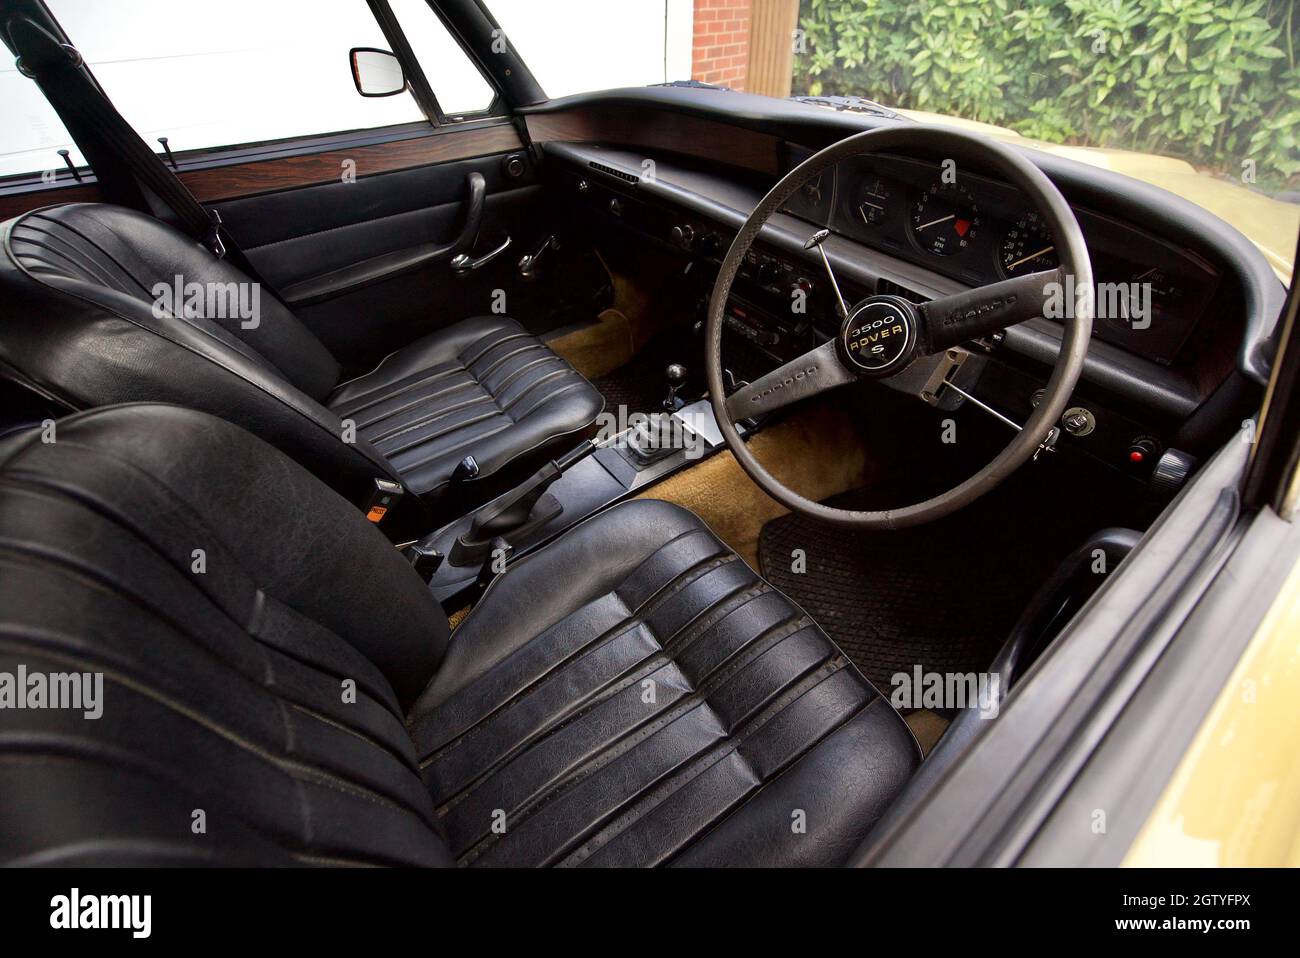 P6 Rover 3500s V8 interior with leather seats and original dashboard Stock Photo